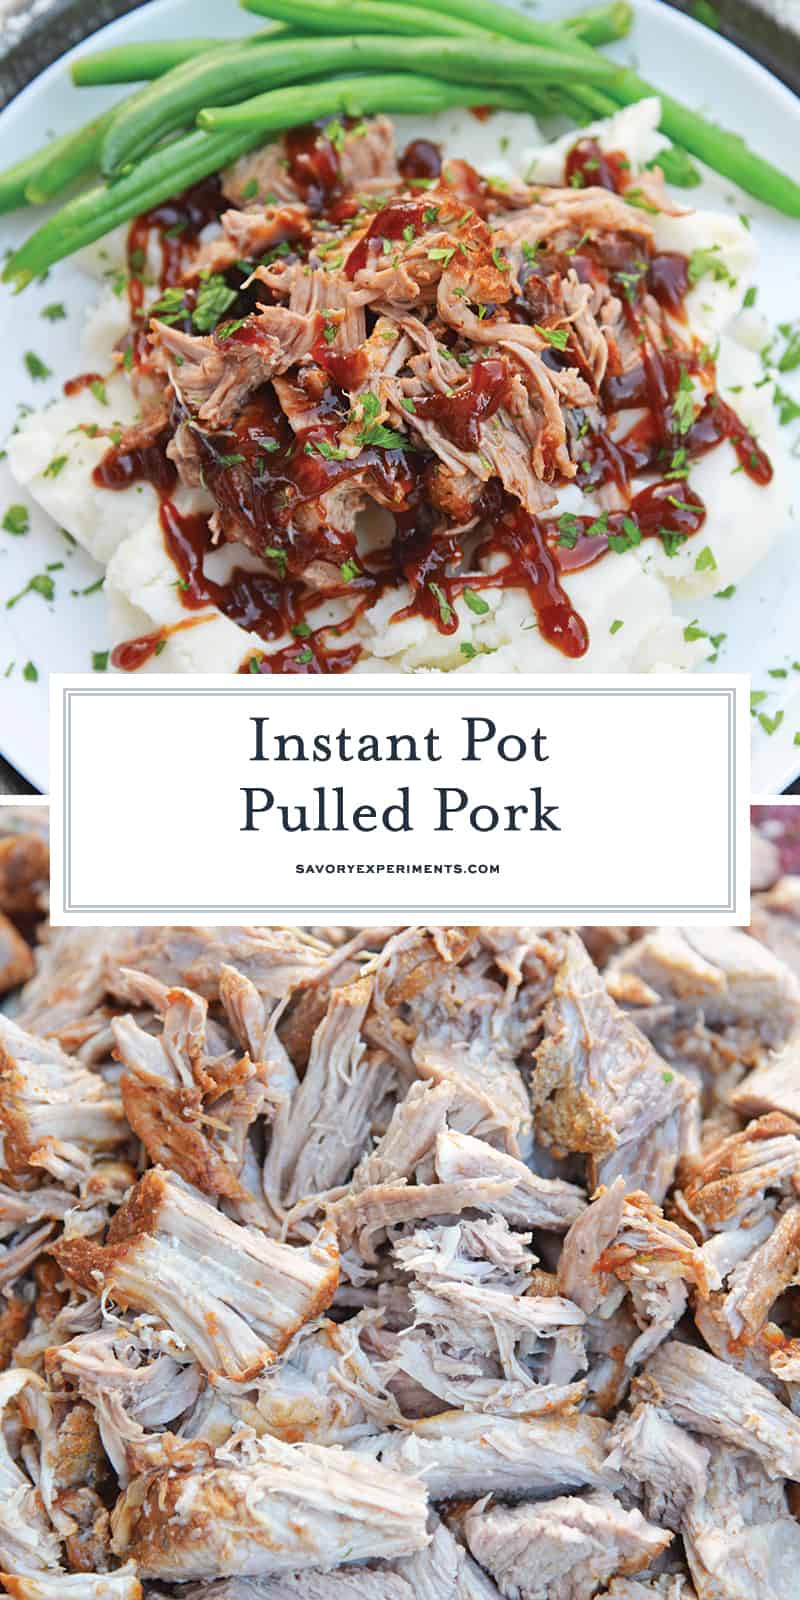 This Instant Pot Pulled Pork Recipe is perfectly seasoned and delicious on tacos, sandwiches or on its own. So easy to make & ready in just one hour! #pulledpork #instantpotpulledpork #bestinstantpotrecipes www.savoryexperiments.com 